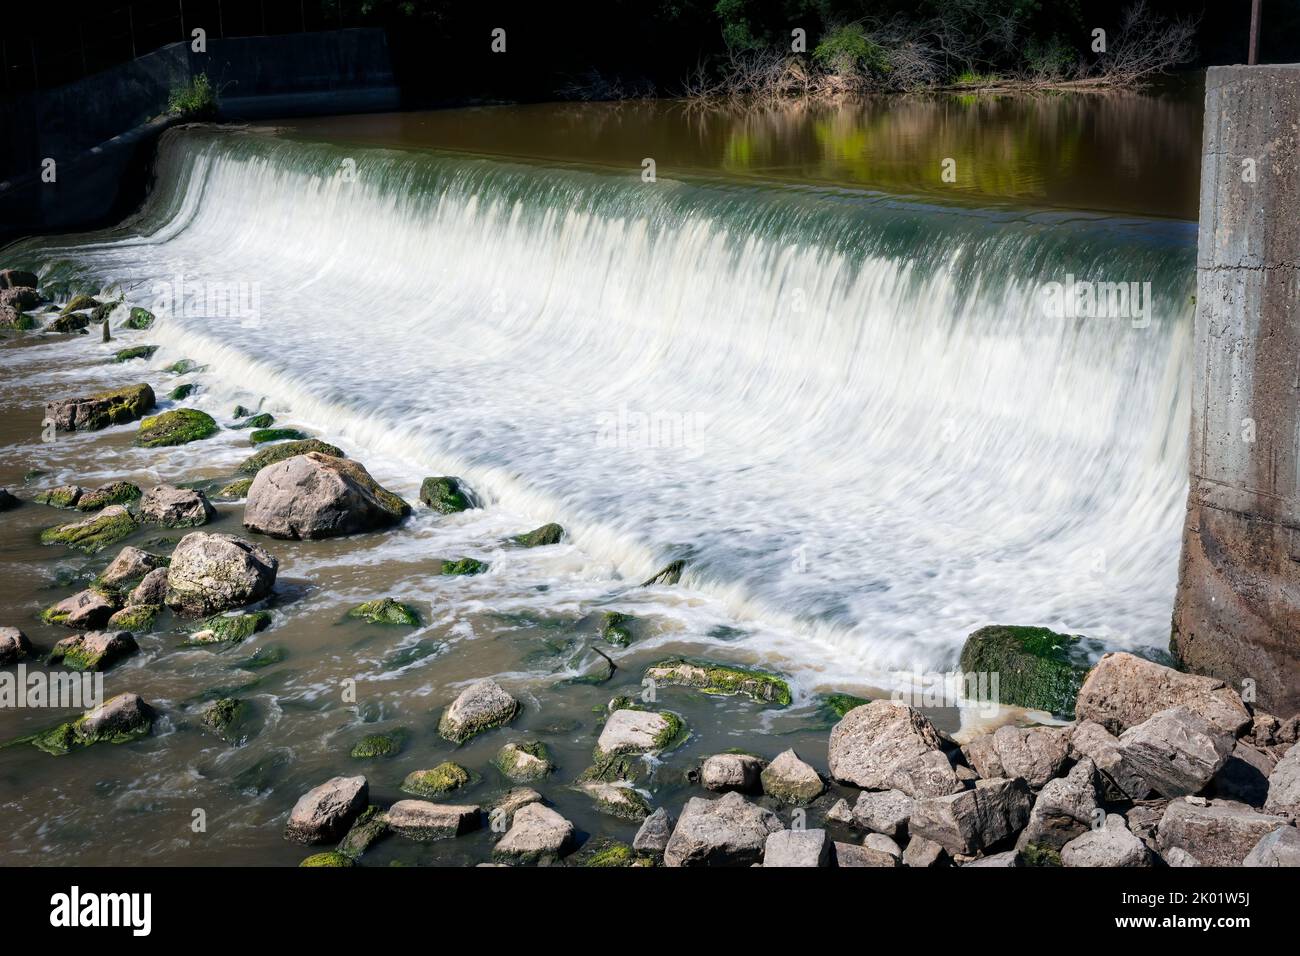 The Manitowoc River flows over the dam near the little town of Clarks Mill near Manitowoc, Wisconsin. Stock Photo